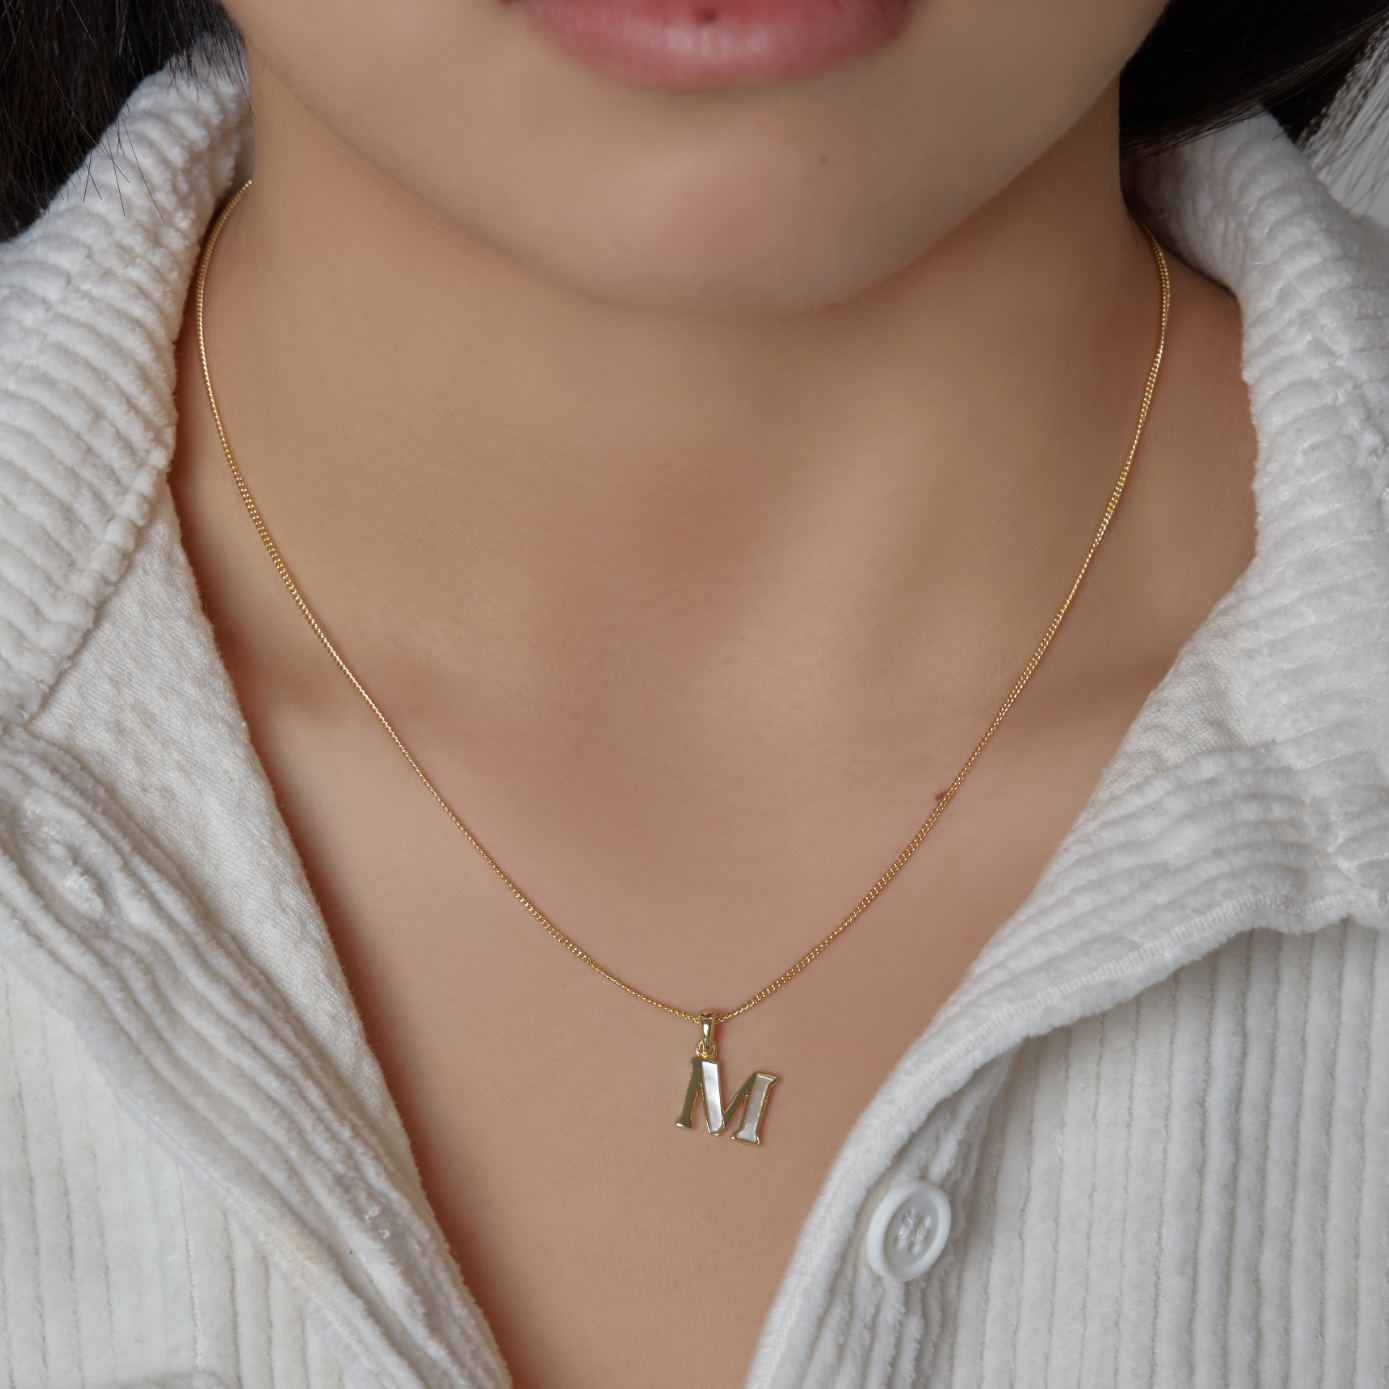 M Letter Name Alphabet Chain Pendant Necklace with Rose Gold Propose  Mangalsutra